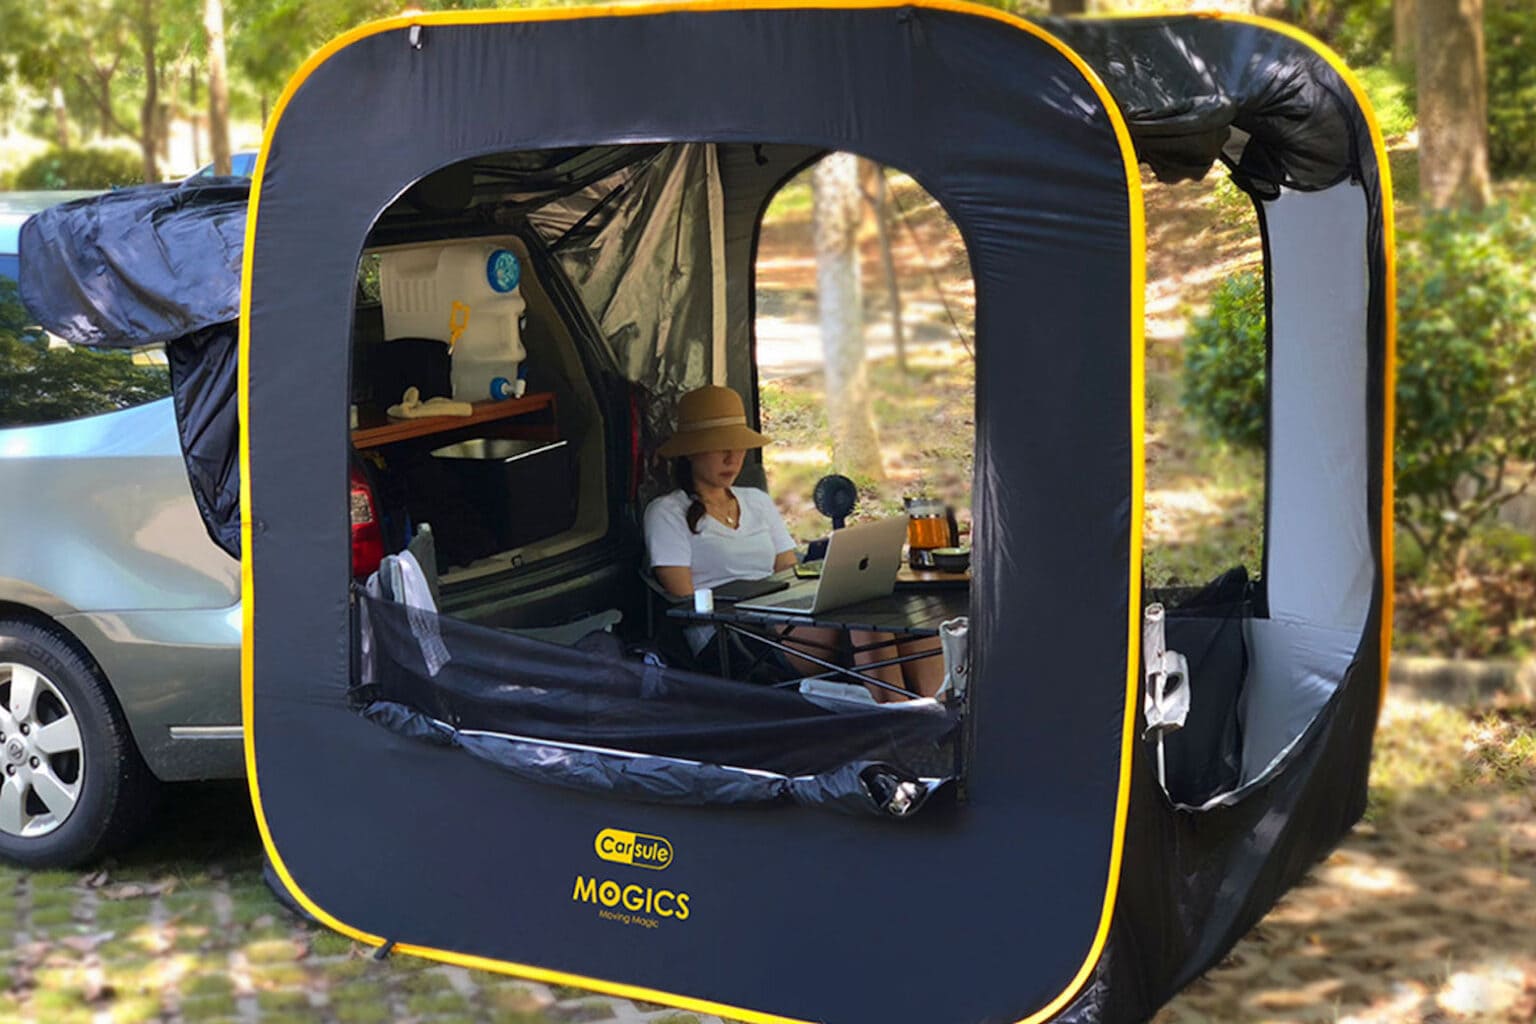 Get the $319.99 tent that extends your car into a cabin.